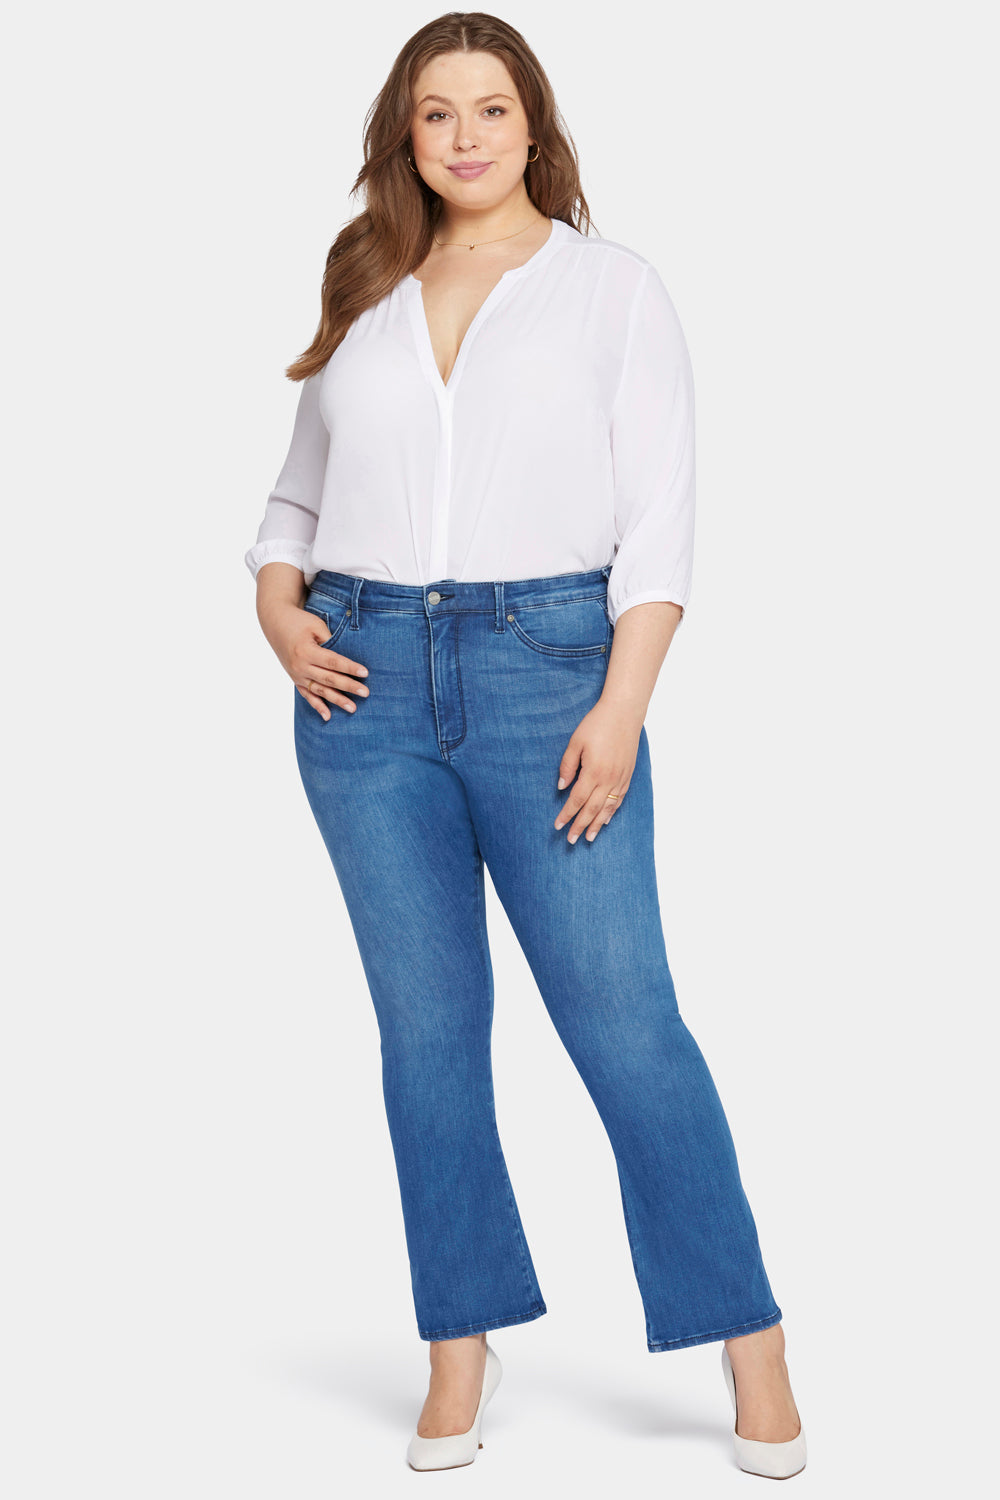 NYDJ Le Silhouette Slim Bootcut Jeans In Petite Plus Size With High Rise - Amour